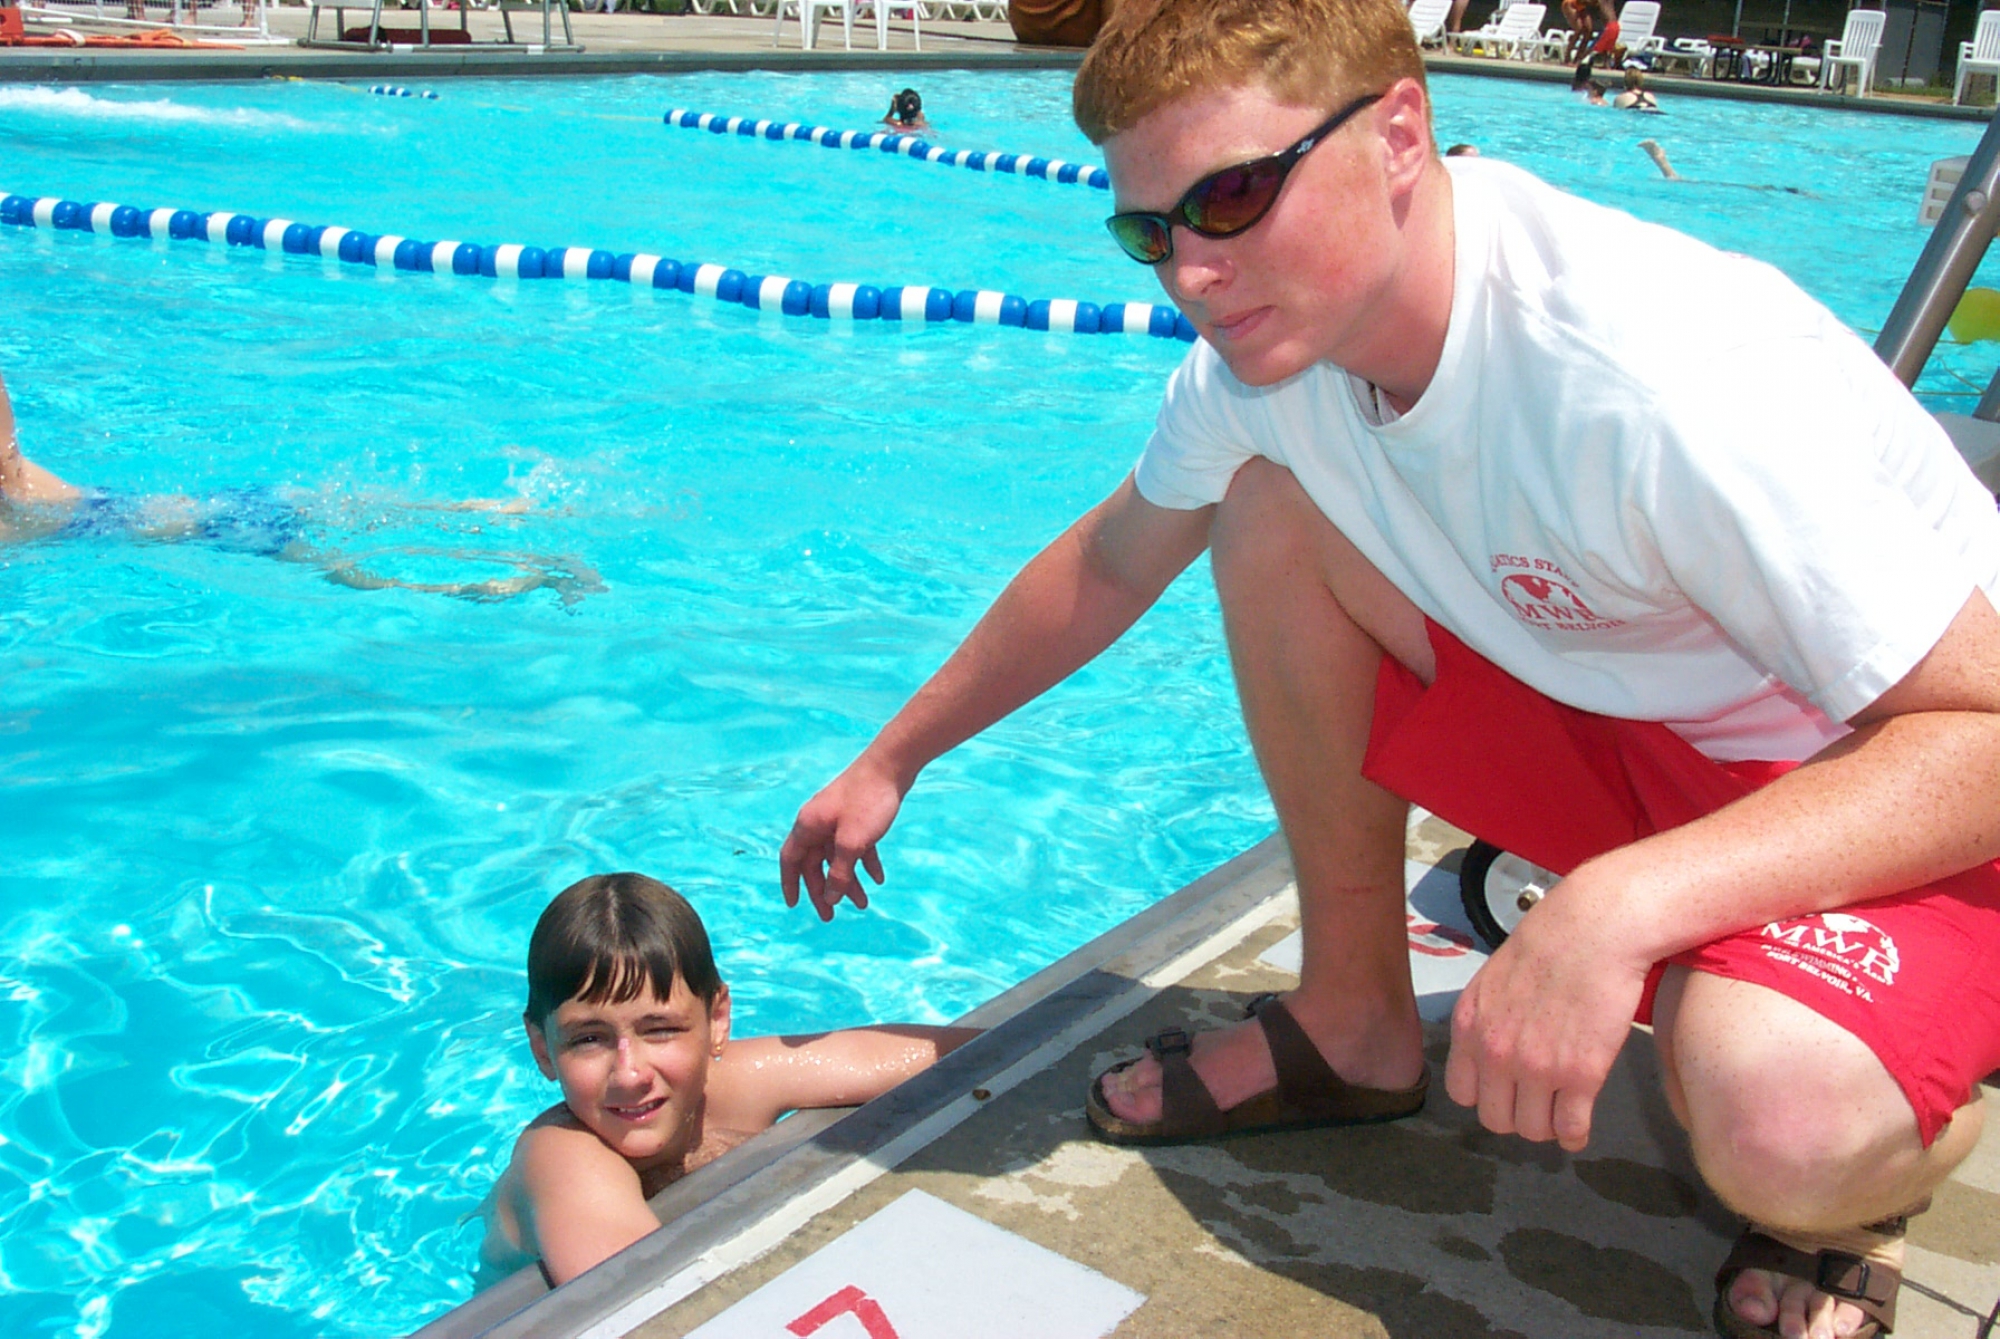 boy in pool with lifeguard